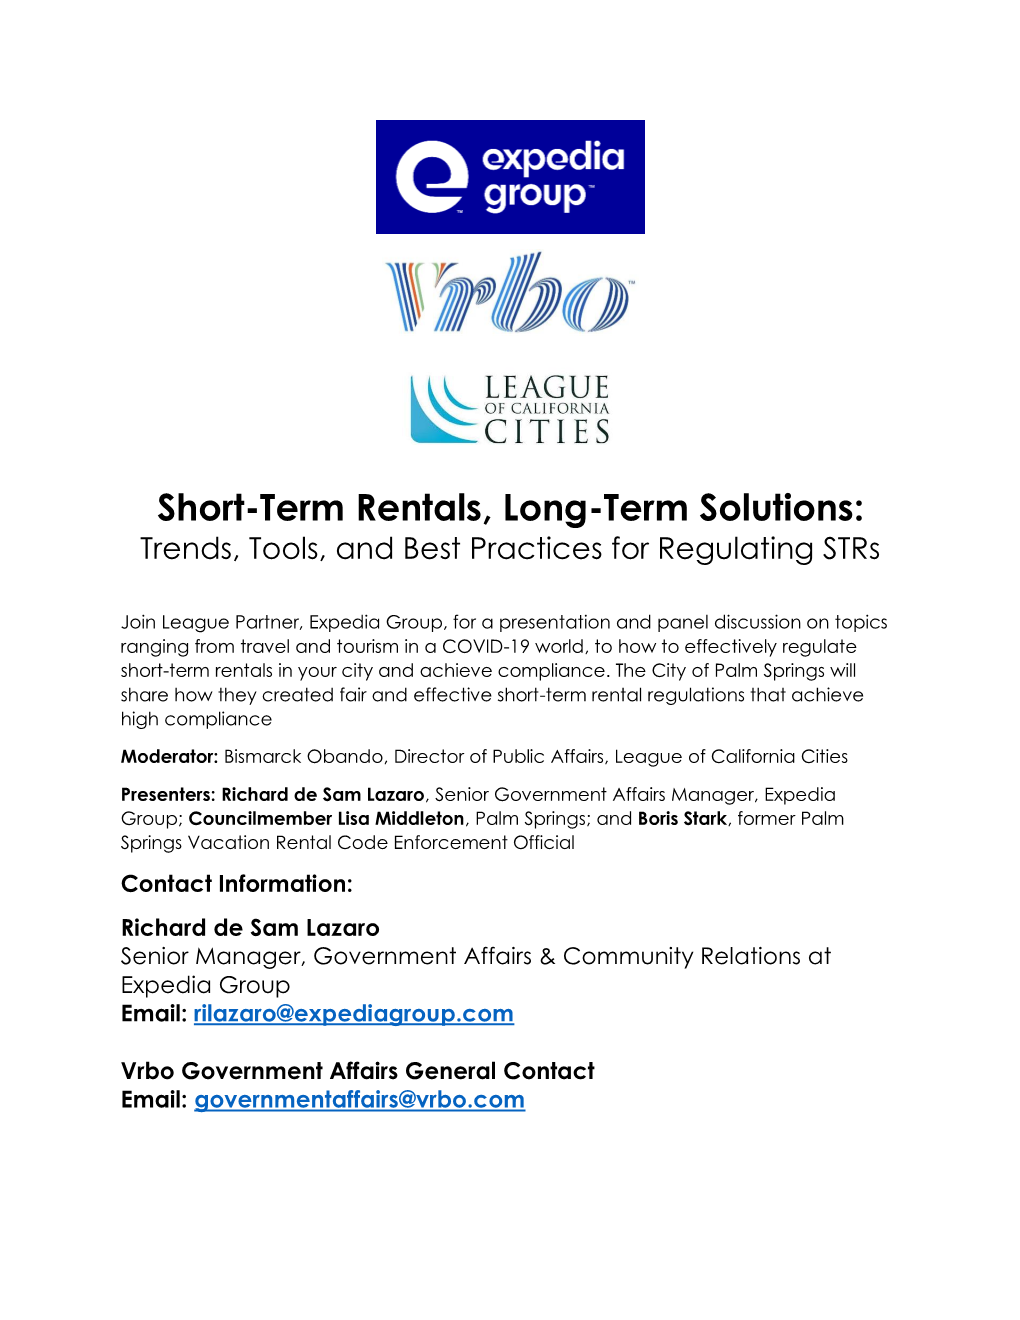 Short-Term Rentals, Long-Term Solutions: Trends, Tools, and Best Practices for Regulating Strs